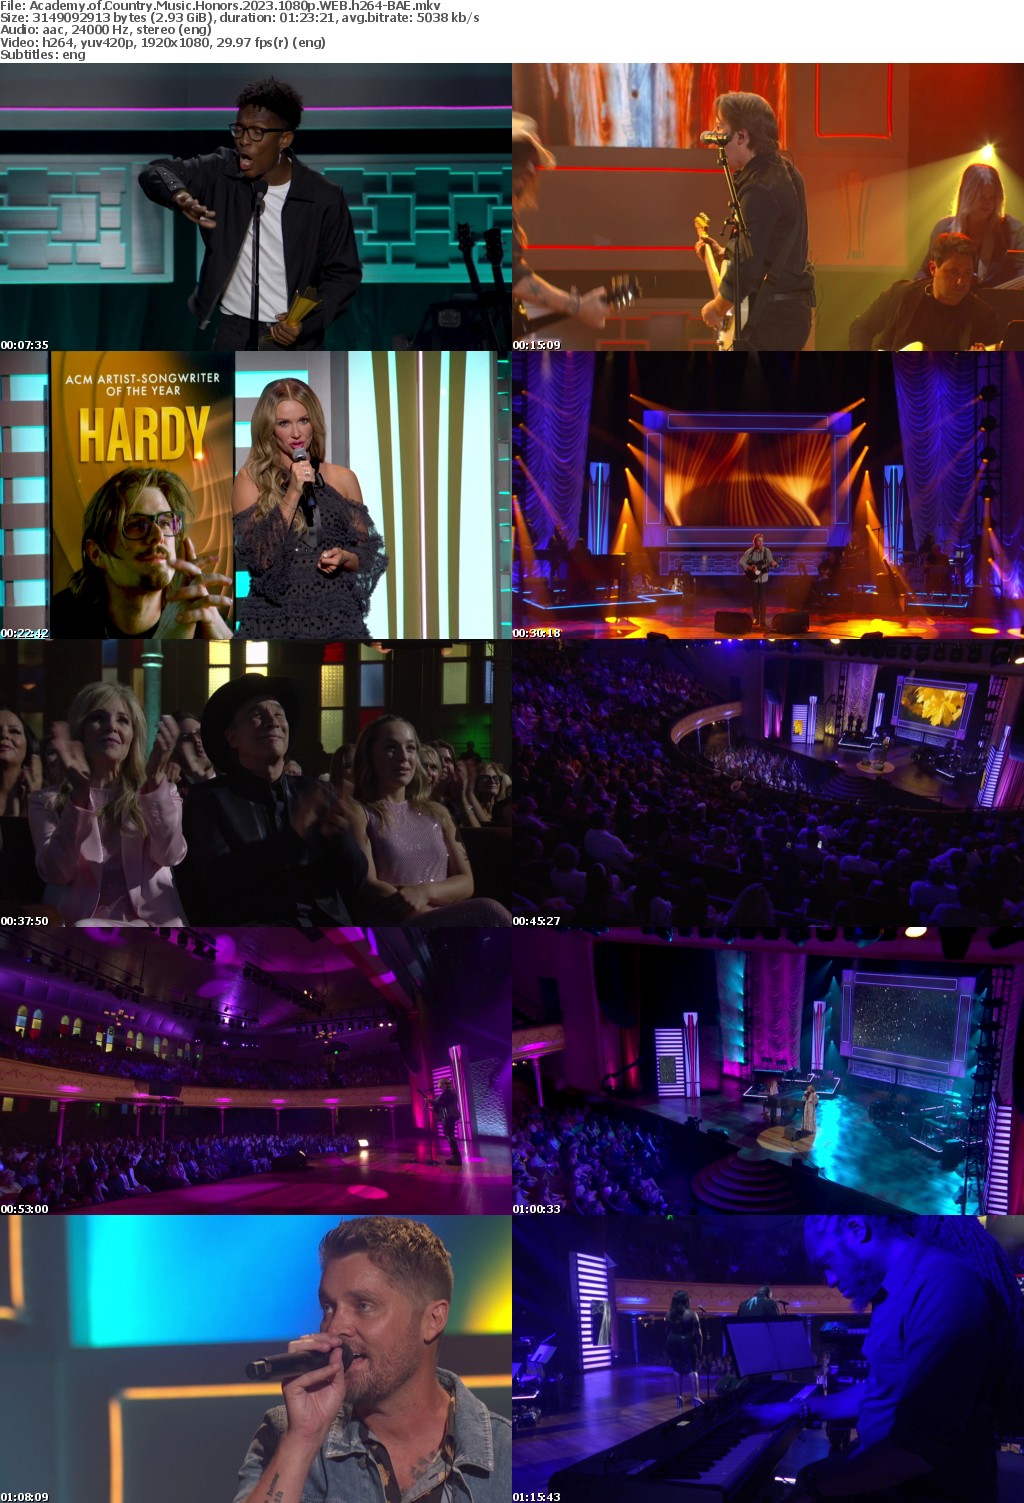 Academy of Country Music Honors 2023 1080p WEB h264-BAE